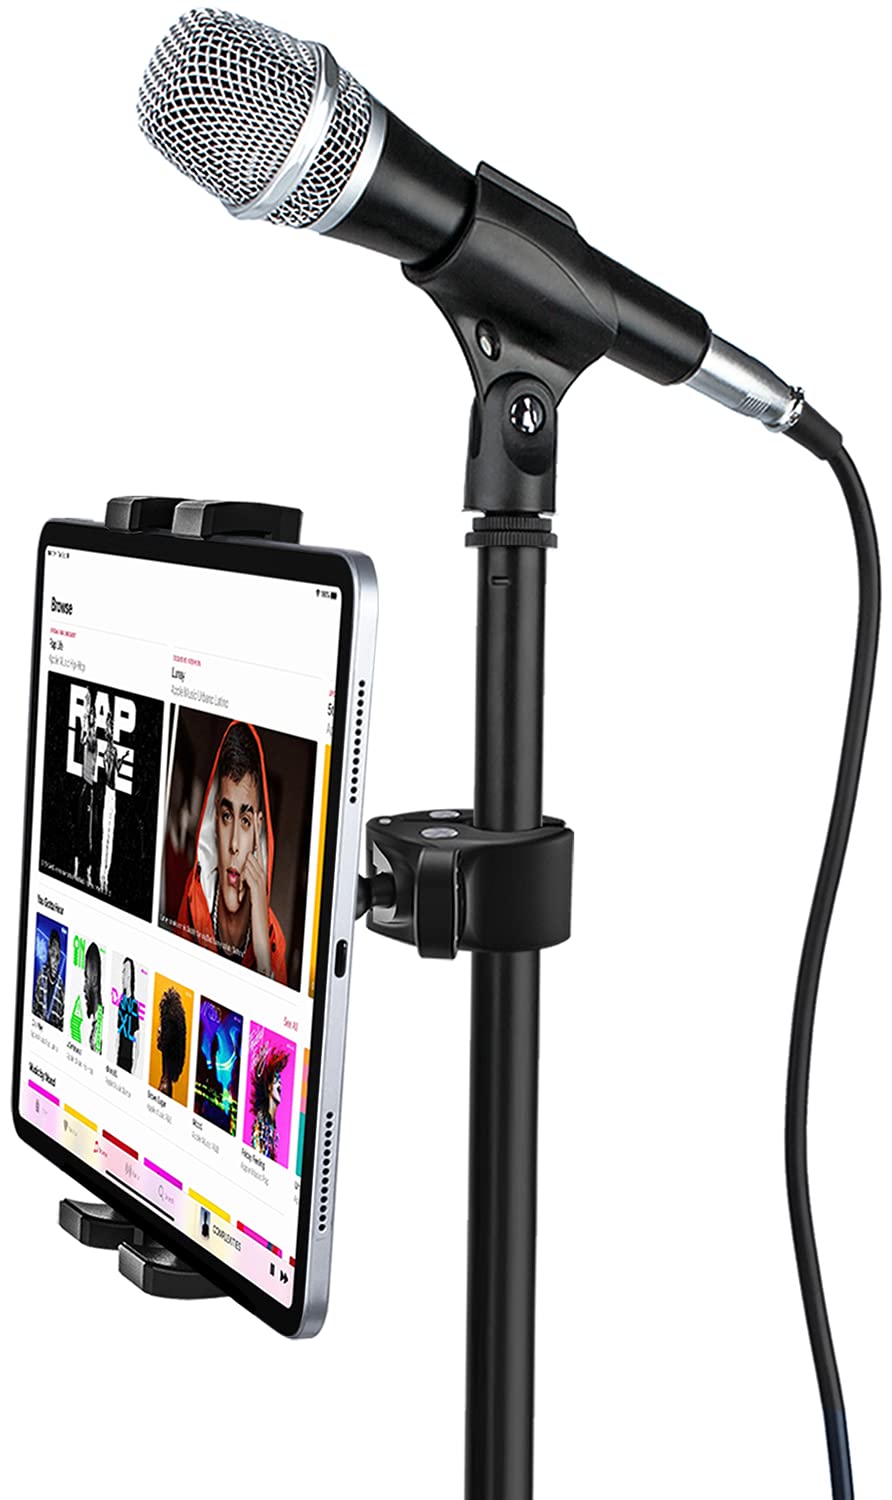  [AUSTRALIA] - Tablet Mic Stand Holder, woleyi Microphone Music Stands Phone & Tablet Mount with Ultra Stable C-Clamp for iPad Pro 9.7, 11, 12.9 / Air / Mini, Galaxy Tabs, iPhone, More 4-13" Smartphones and Tablets